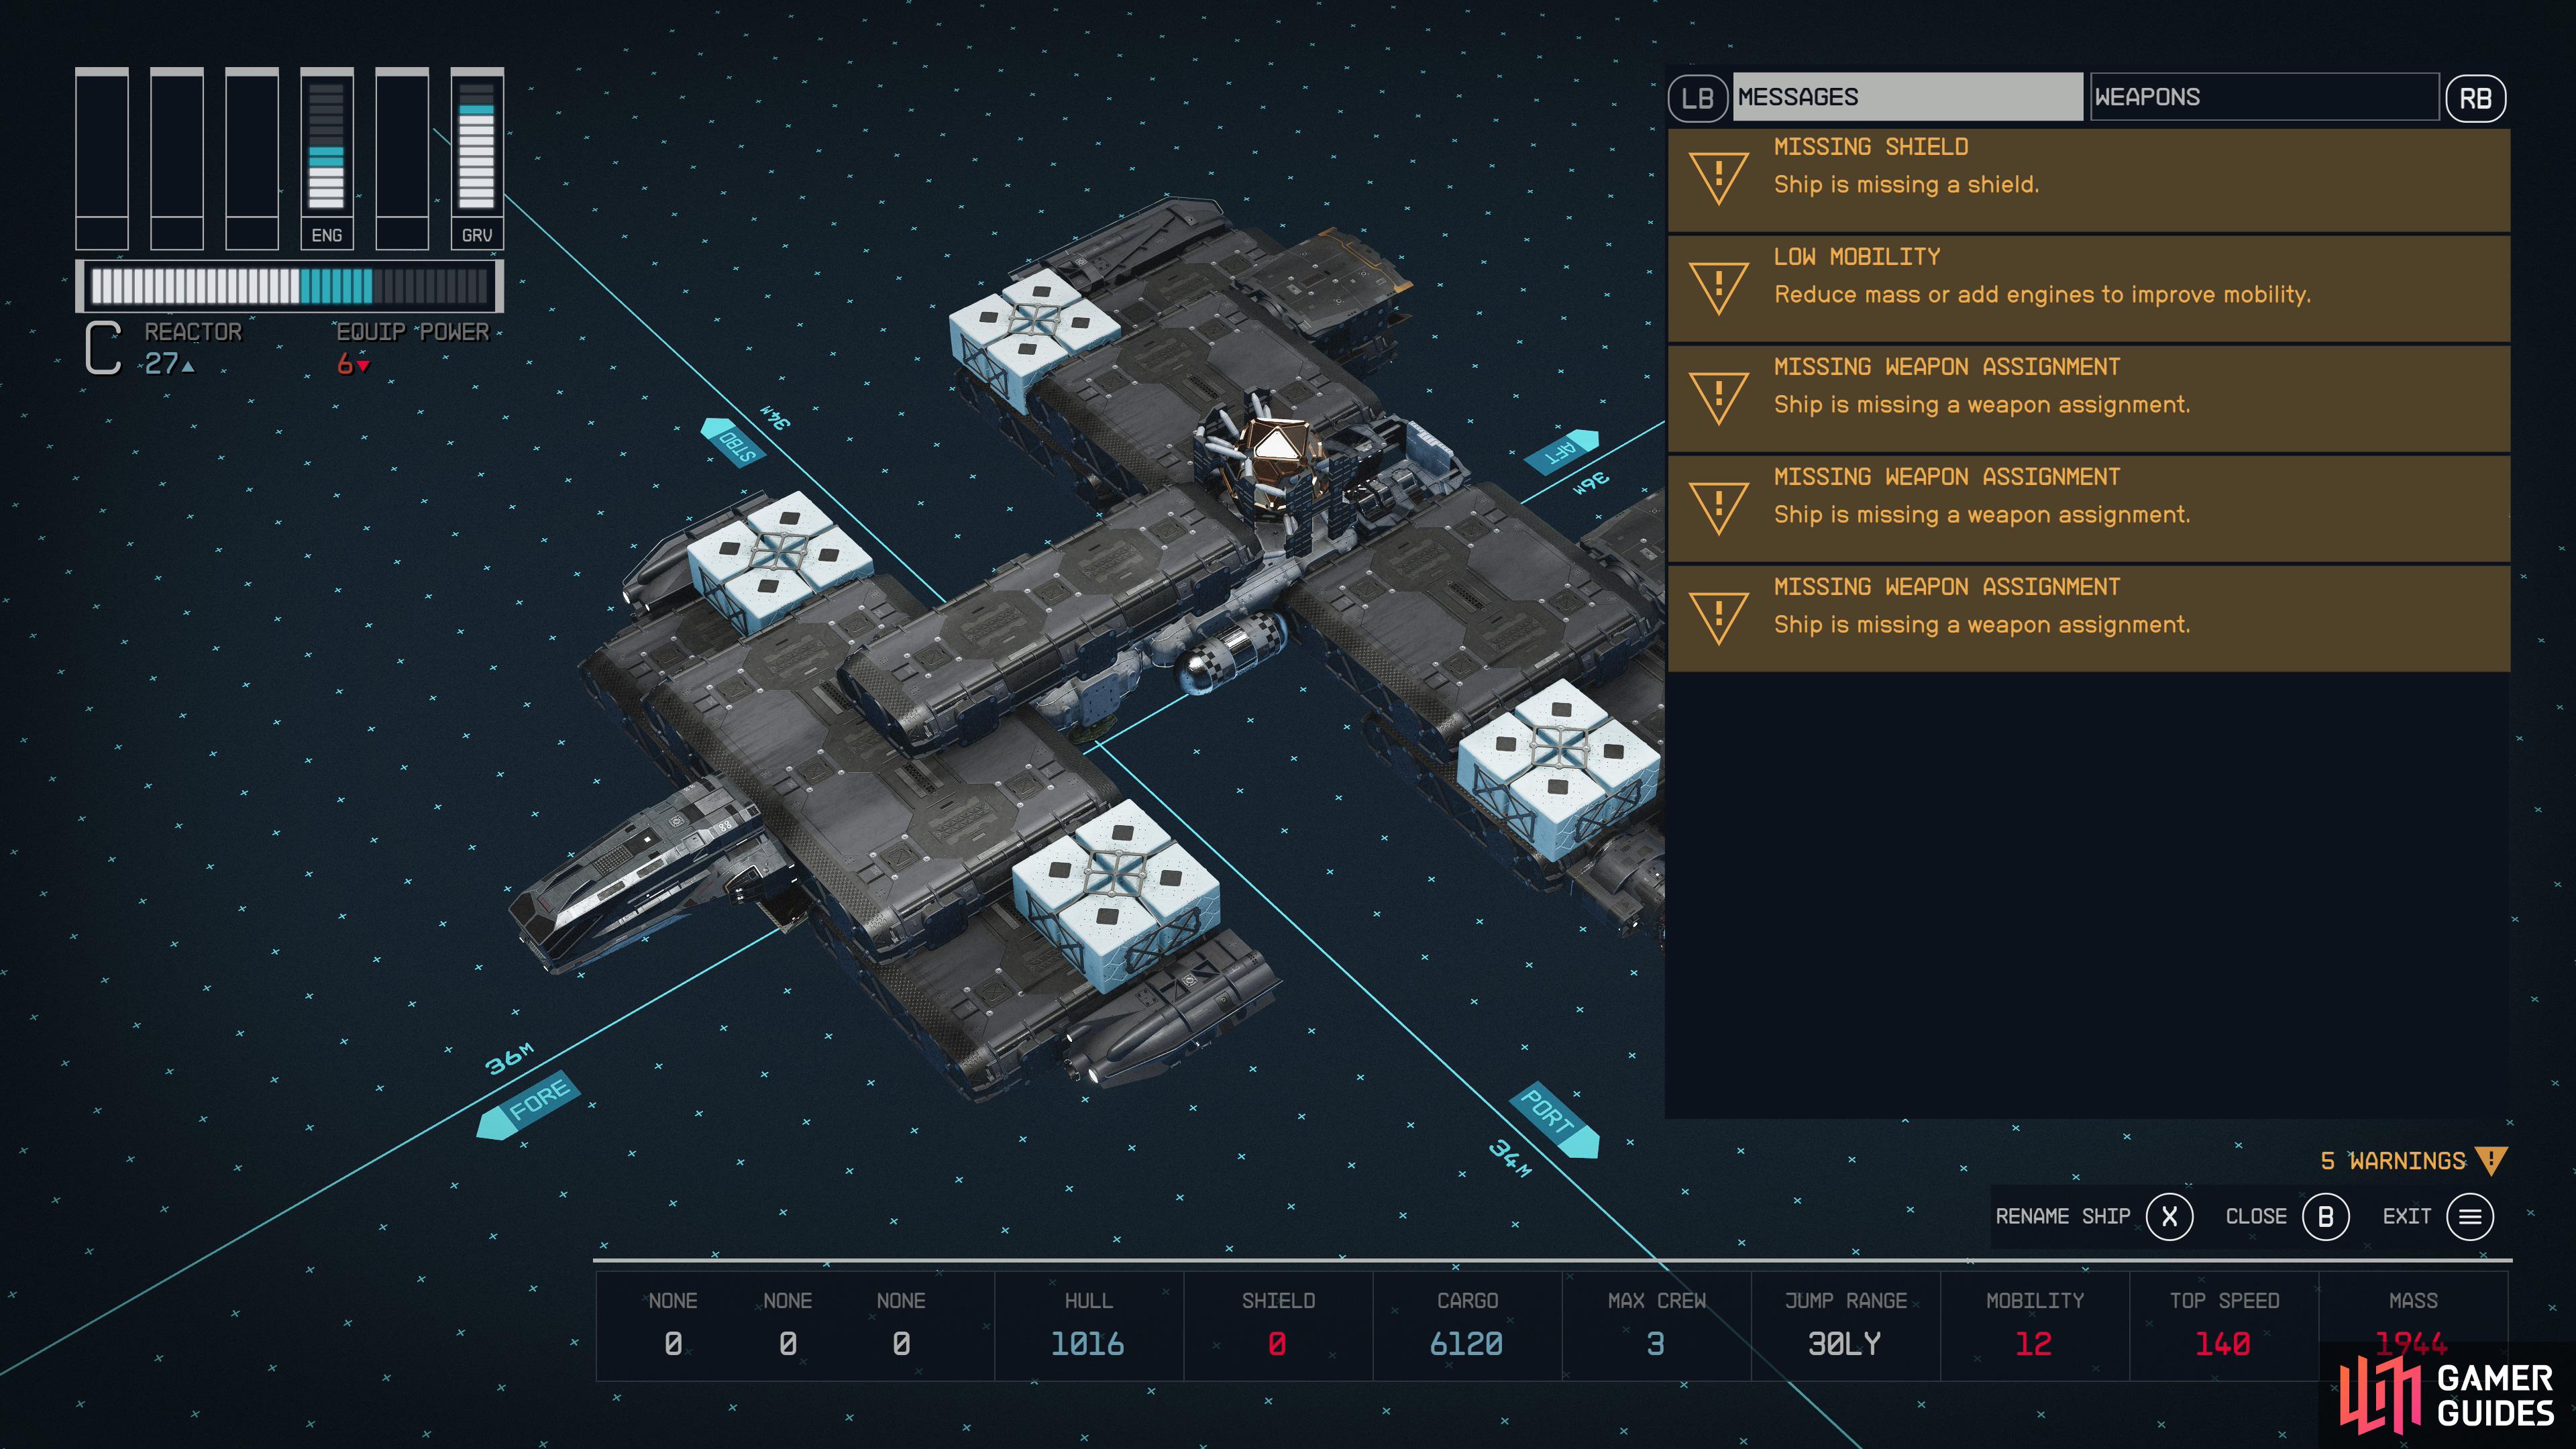 Warnings are less important than errors - especially the redundant weapons slots, if you know what you're doing. You don't have to "fix" these before exiting Ship Builder.